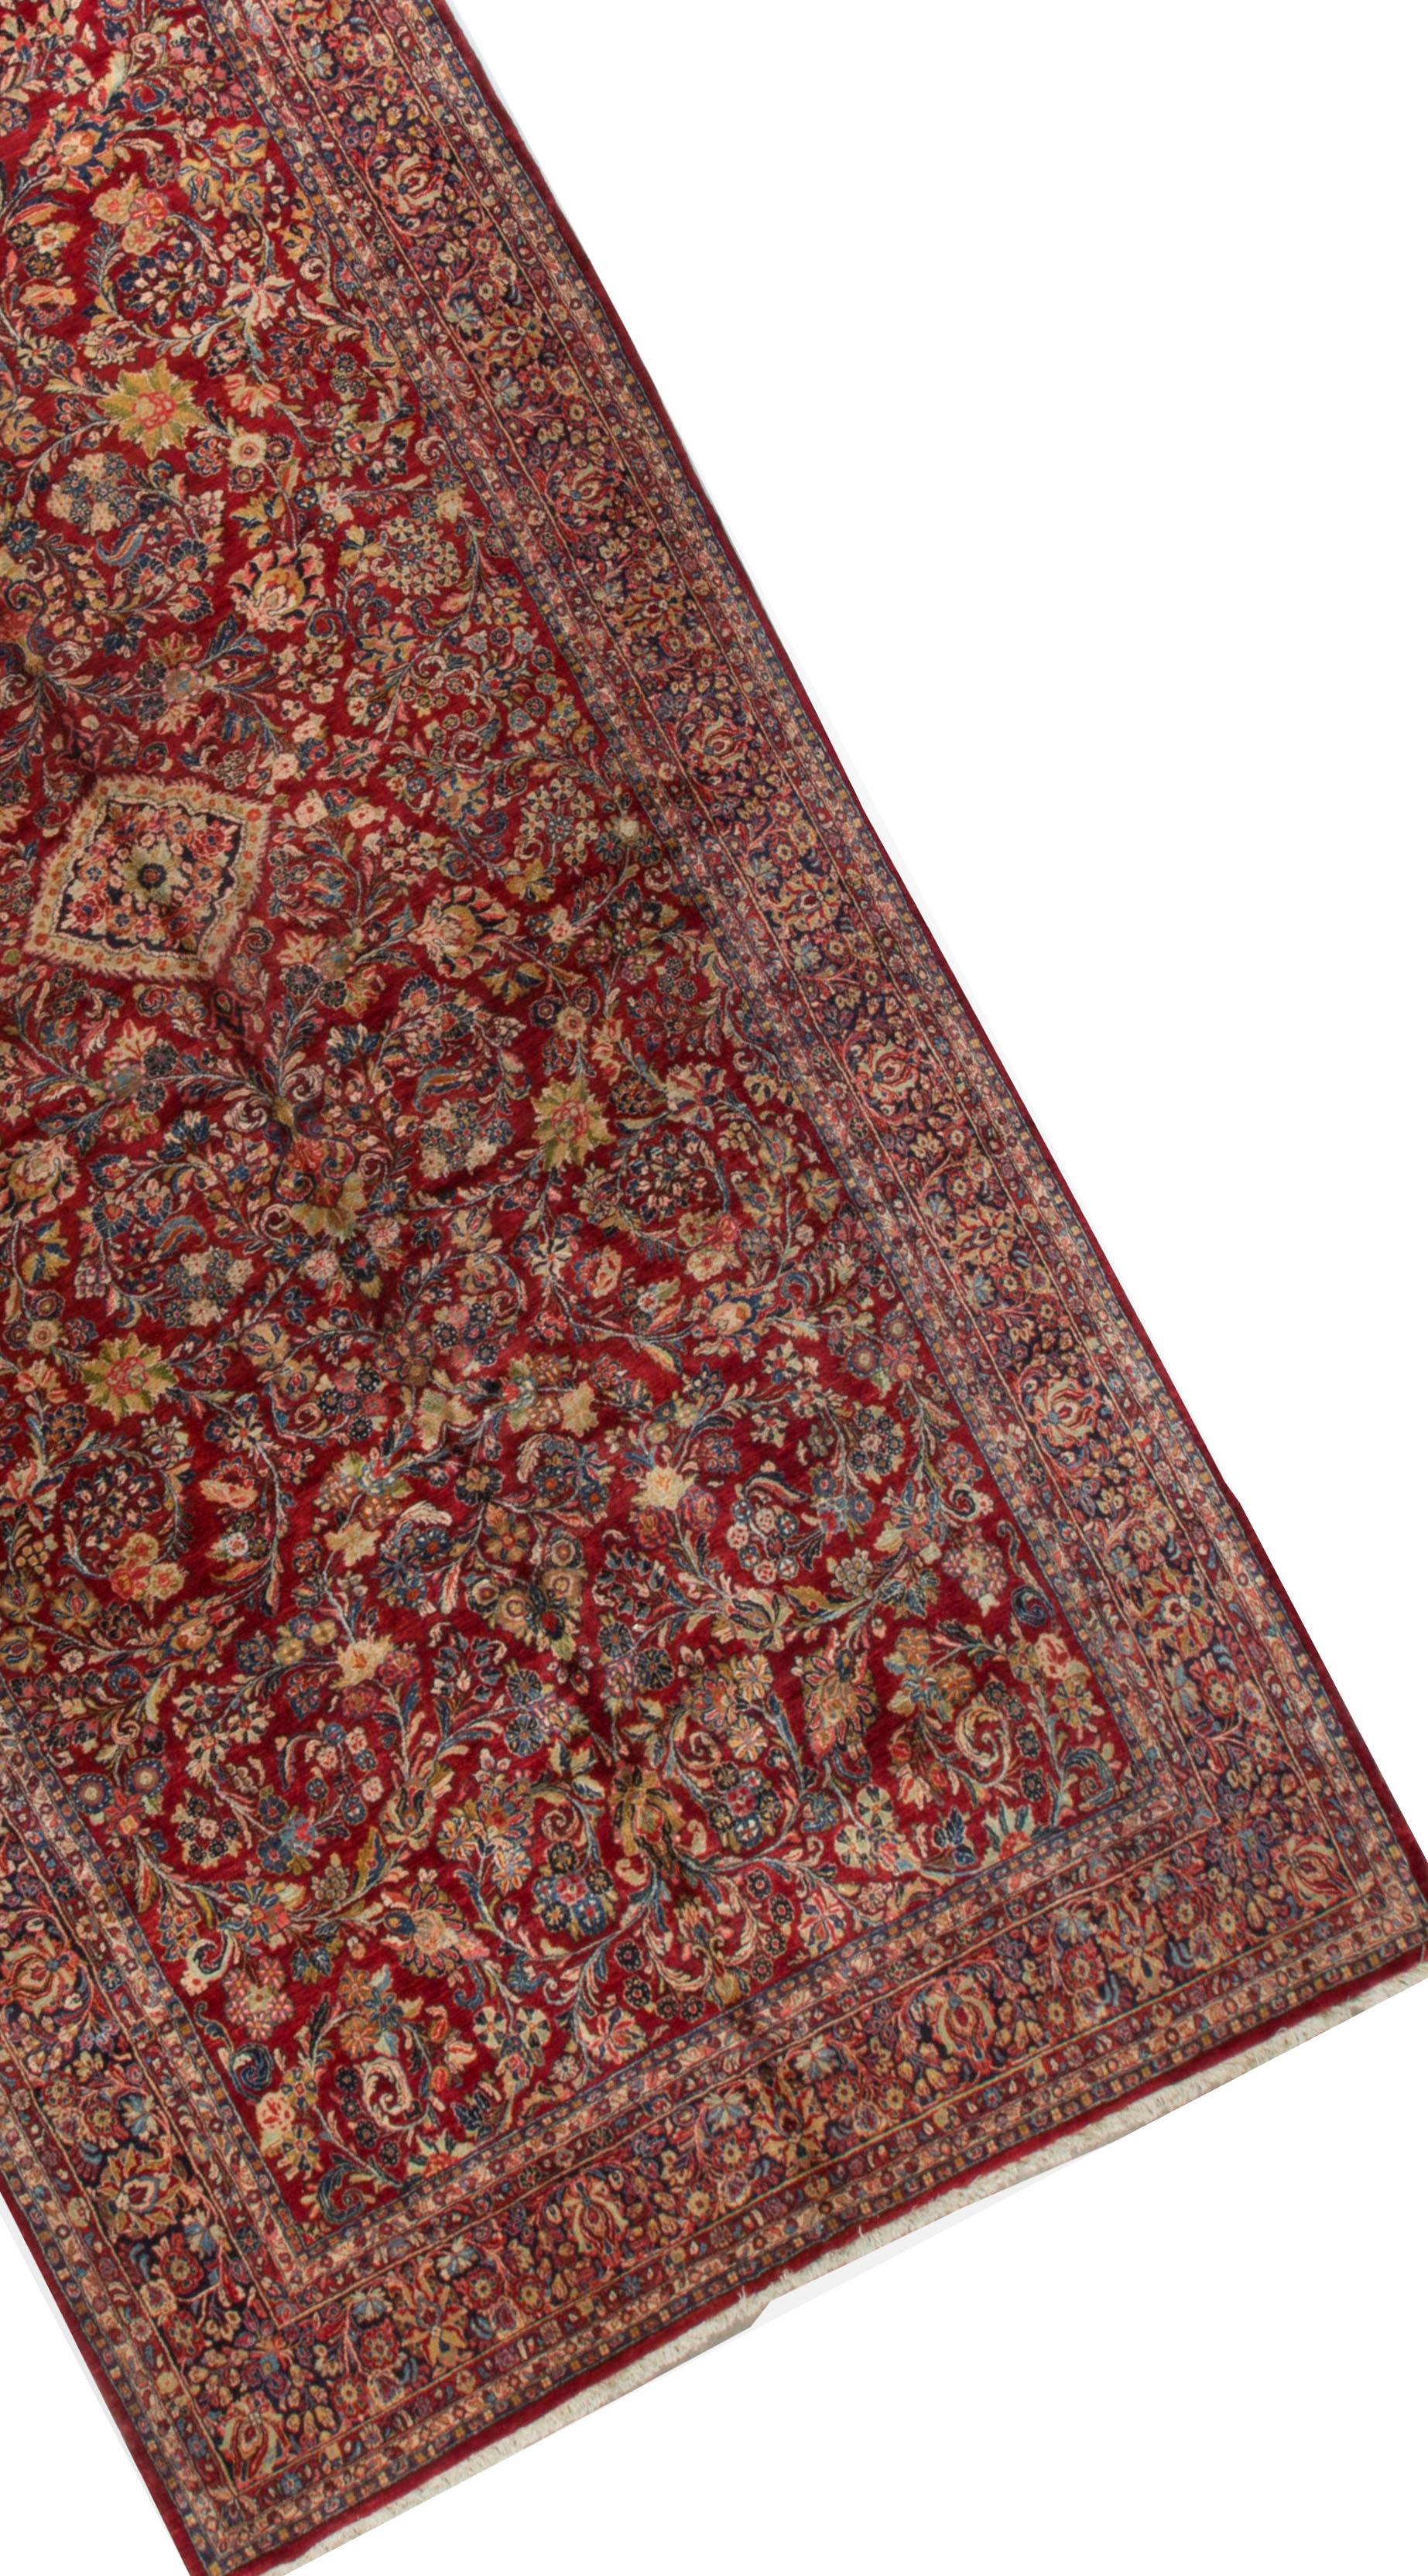 This difficult to find size gallery rug, is designed to create an impact. The whole rug is filled to profusion with detailed floral designs all woven with precision and attention to the smallest detail. Sarouk rugs are from the village of Sarouk